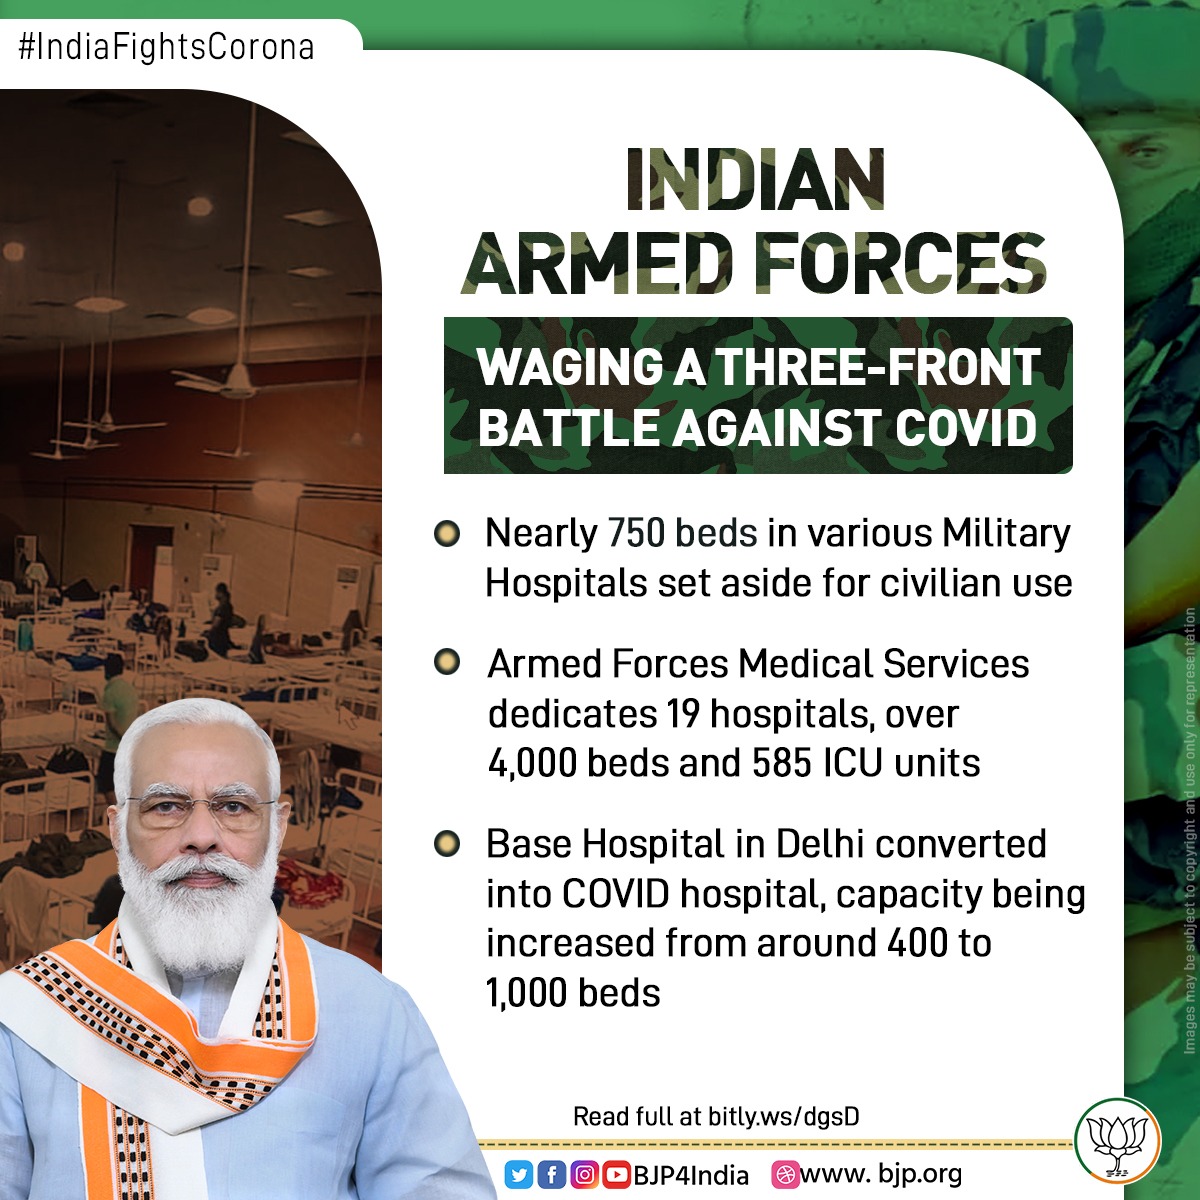 With 750 beds in various #MilitaryHospitals set aside for civilian use, #IndianArmedForces leaving no stone unturned in the #FightAgainstCOVID19 .

#ArmedForcesMedicalServices has also dedicated 19 hospitals, over 4,000 beds & 585 ICU units across India.

#IndiaFightsCOVID19